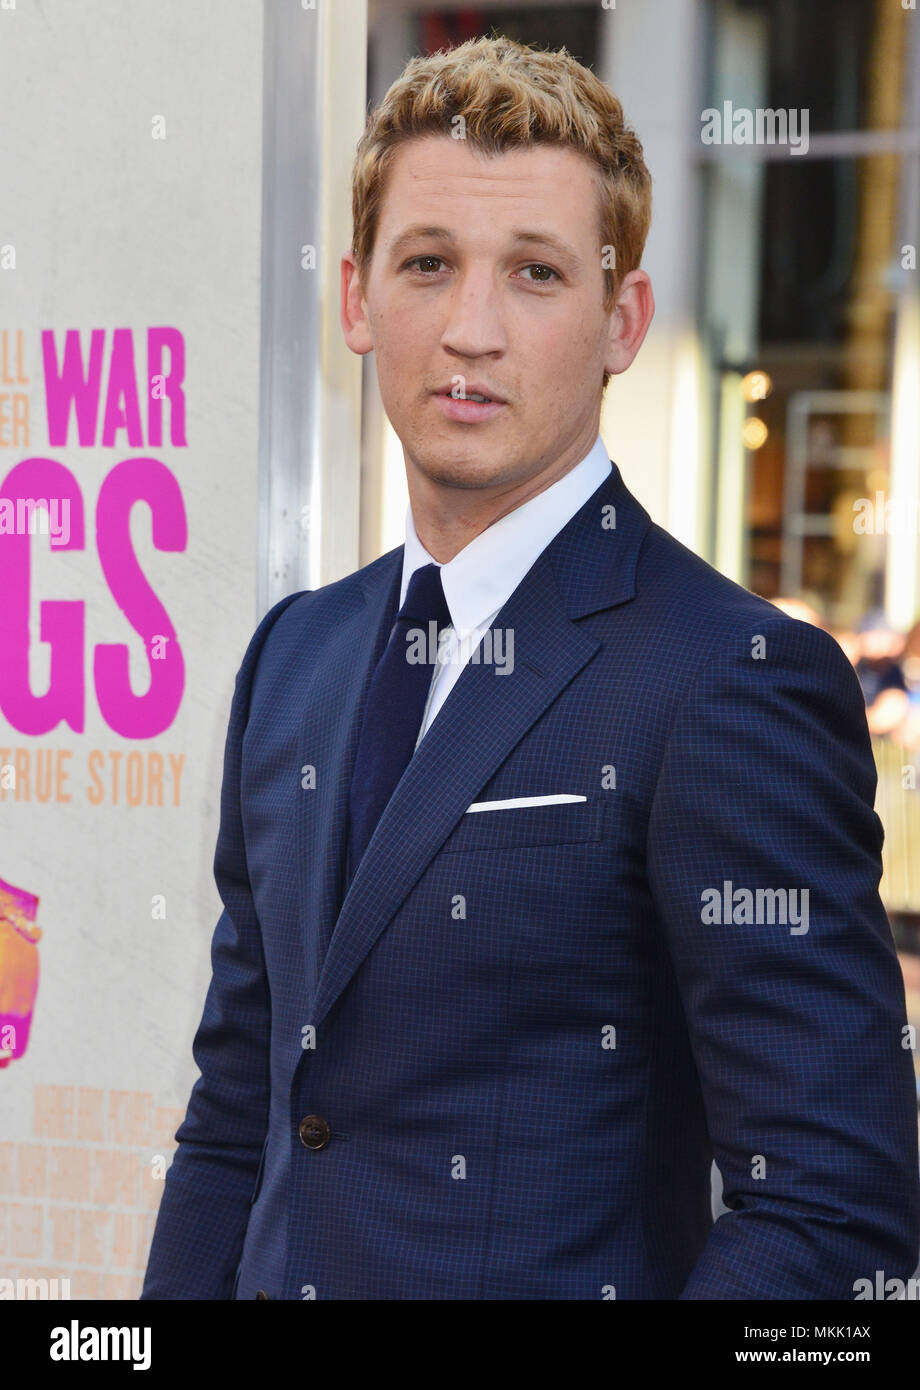 Mike Teller 019 at the War Dogs Premiere at the TCL Chinese Theatre in Los Angeles. August 15, 2016.Mike Teller 019  Event in Hollywood Life - California,  Red Carpet Event, Vertical, USA, Film Industry, Celebrities,  Photography, Bestof, Arts Culture and Entertainment, Topix Celebrities fashion / one person, Vertical, Best of, Hollywood Life, Event in Hollywood Life - California,  Red Carpet and backstage, USA, Film Industry, Celebrities,  movie celebrities, TV celebrities, Music celebrities, Photography, Bestof, Arts Culture and Entertainment,  Topix, headshot, vertical, from the year , 2016 Stock Photo